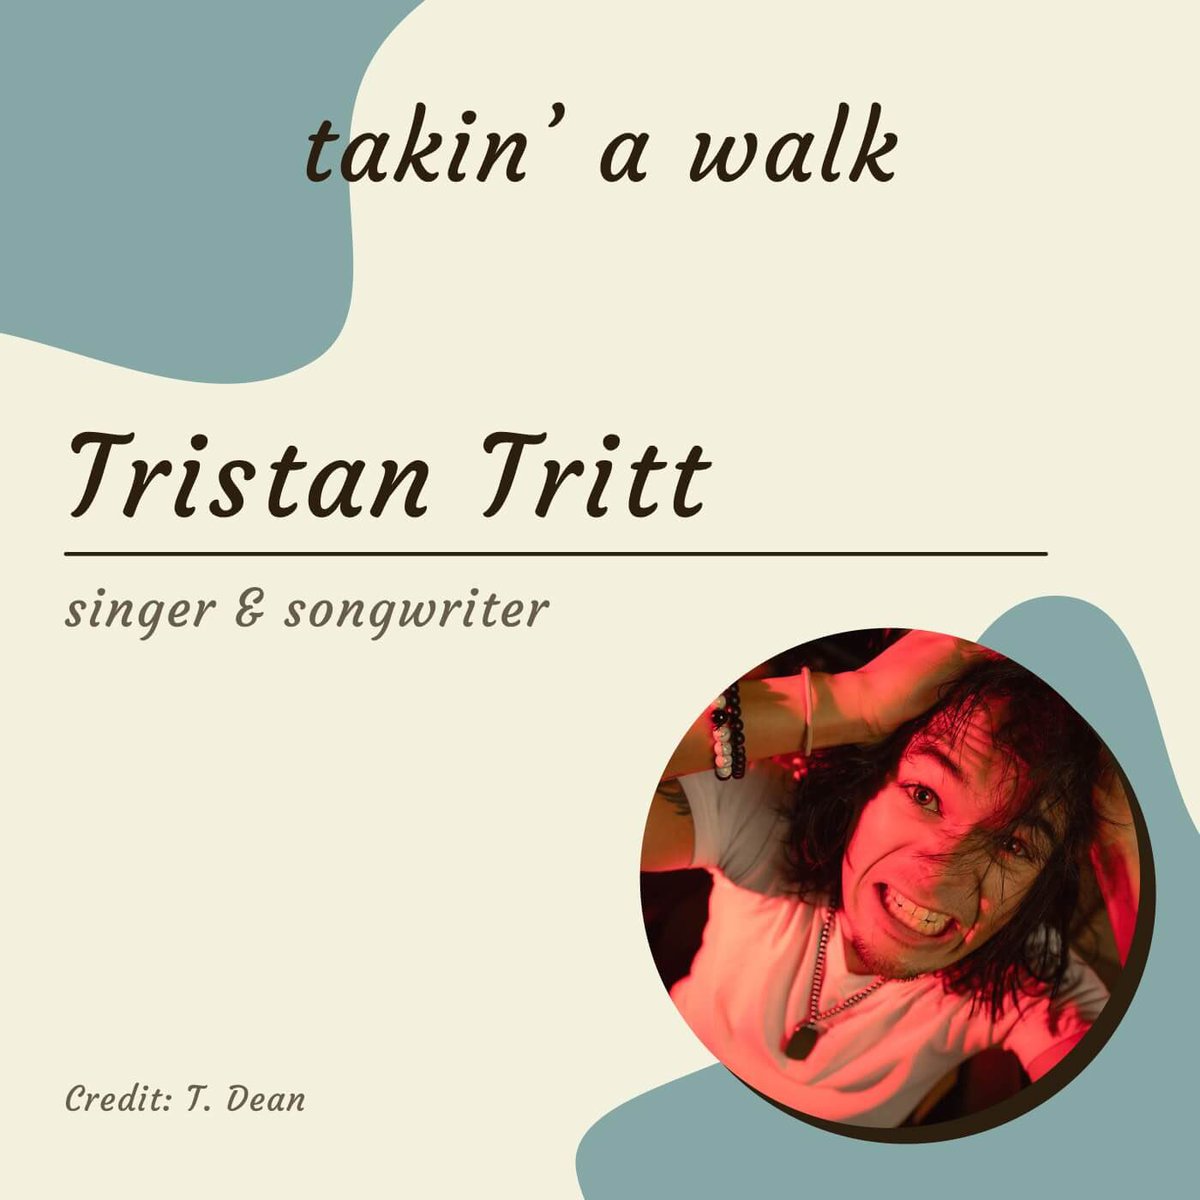 From New artists to Hall of Famers Tristan Tritt-#rocksinger and son of @Travistritt on Takin A Walk. #authenticity Follow here podcasts.apple.com/us/podcast/tak… #NewMusic2024